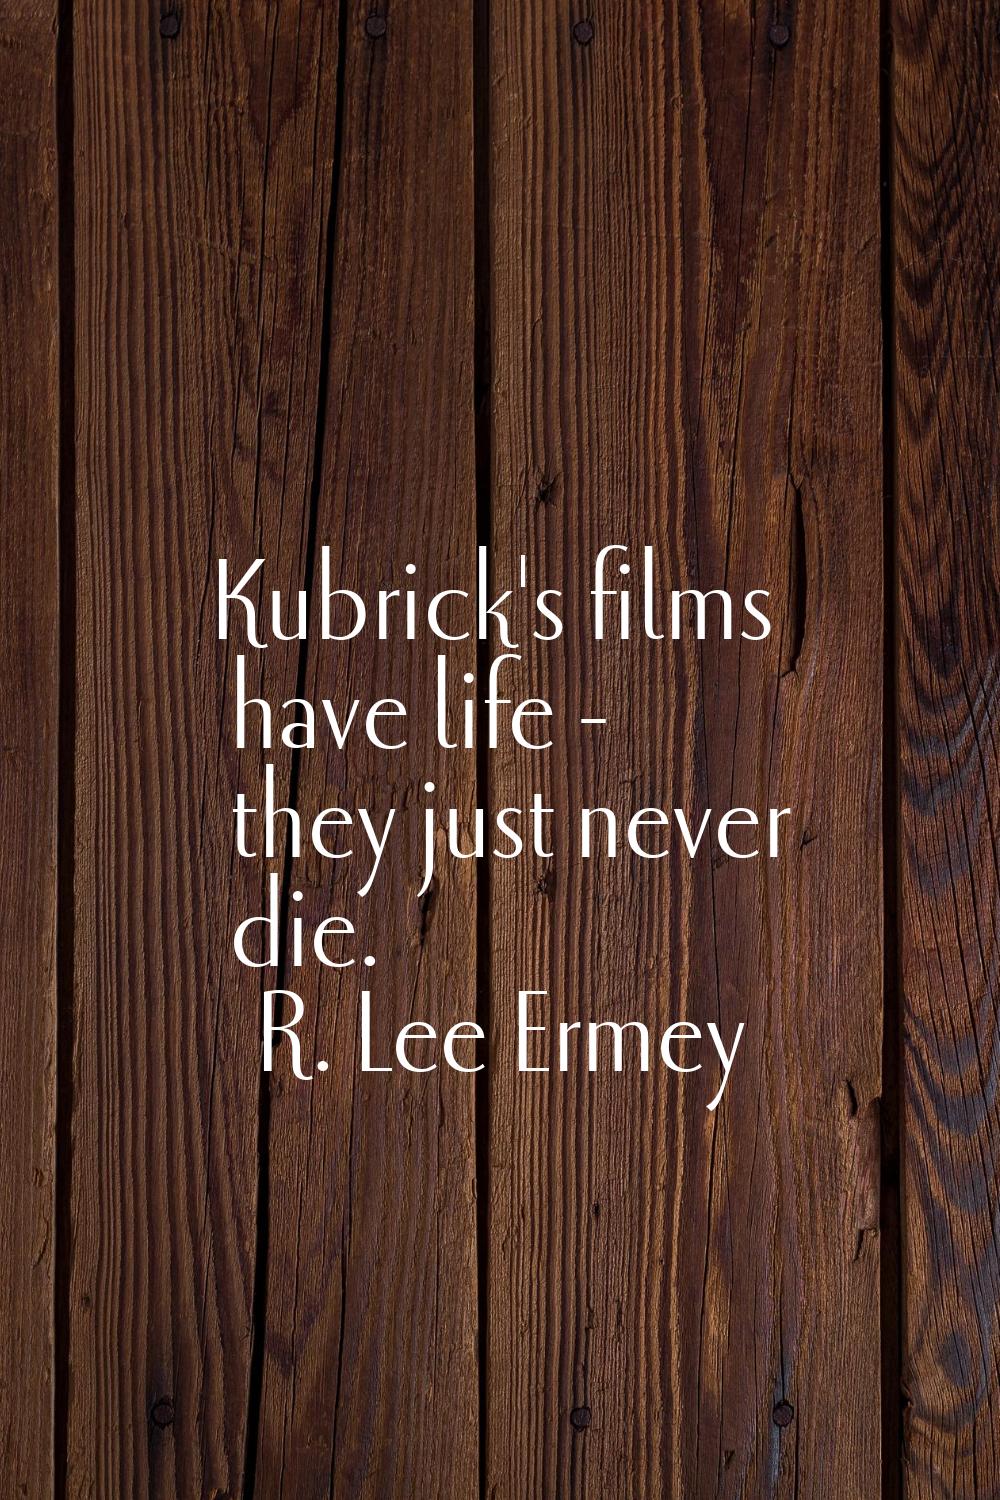 Kubrick's films have life - they just never die.